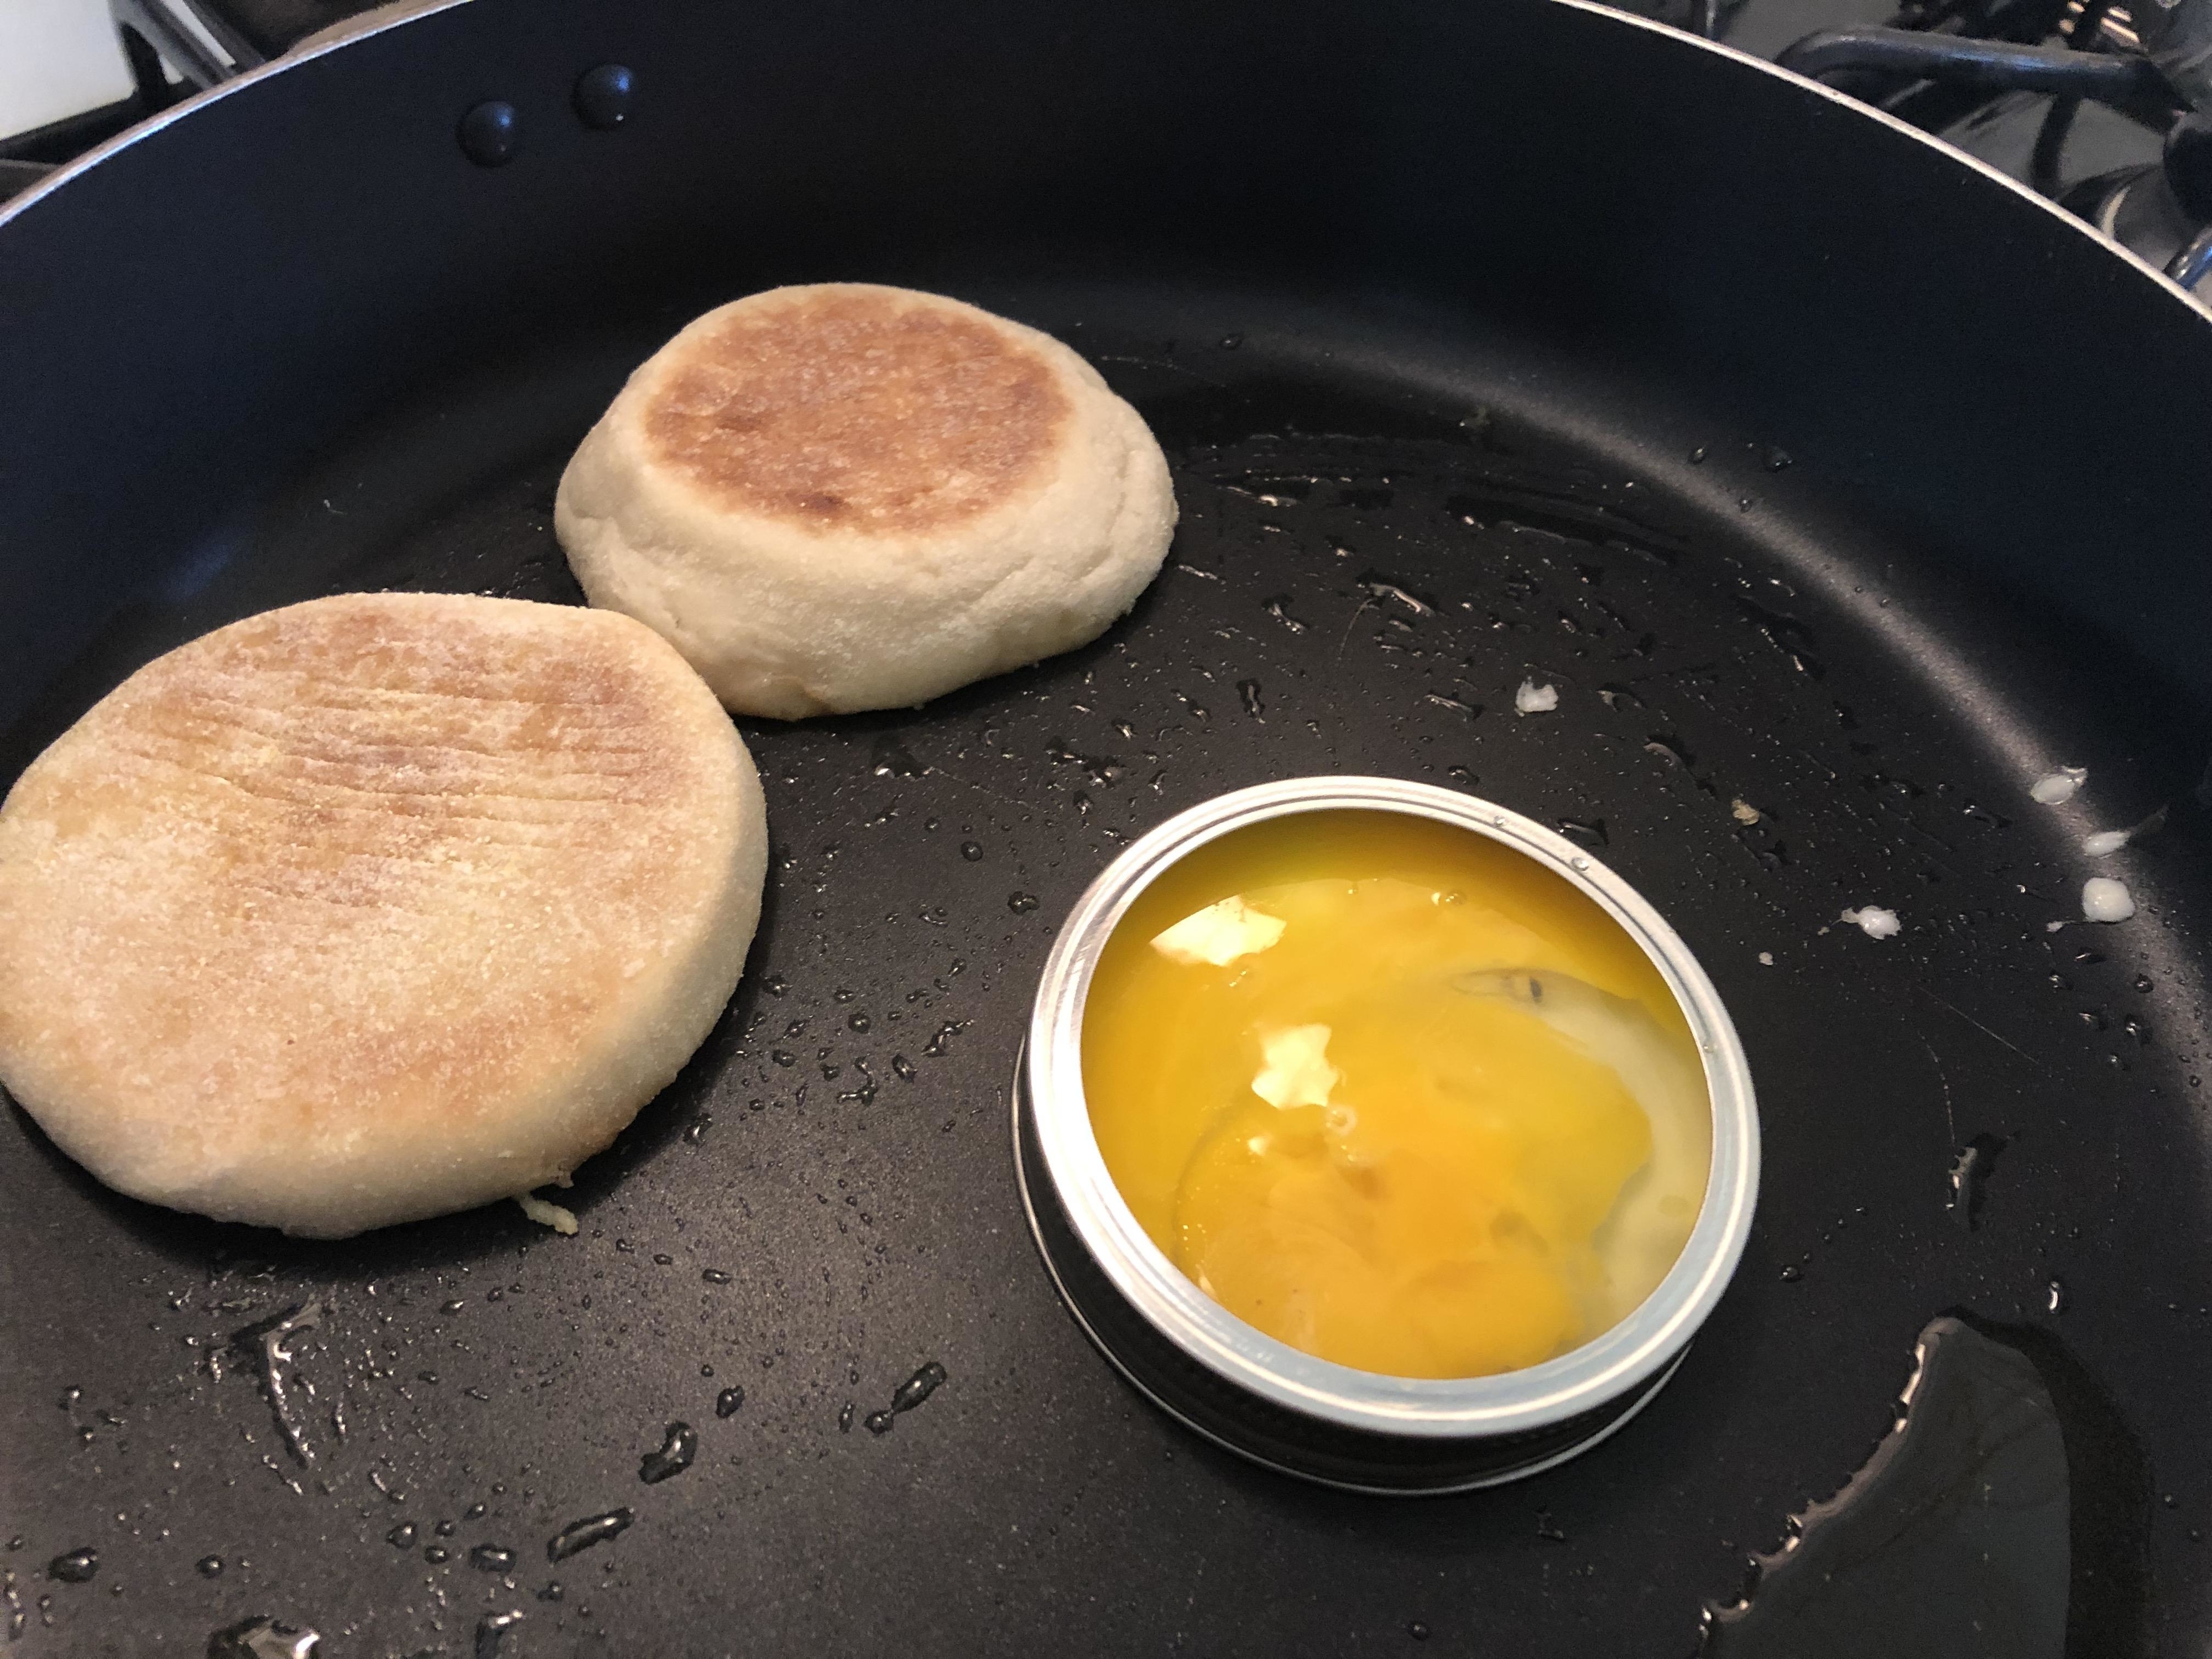 A jar lid in a skillet with an egg inside of it